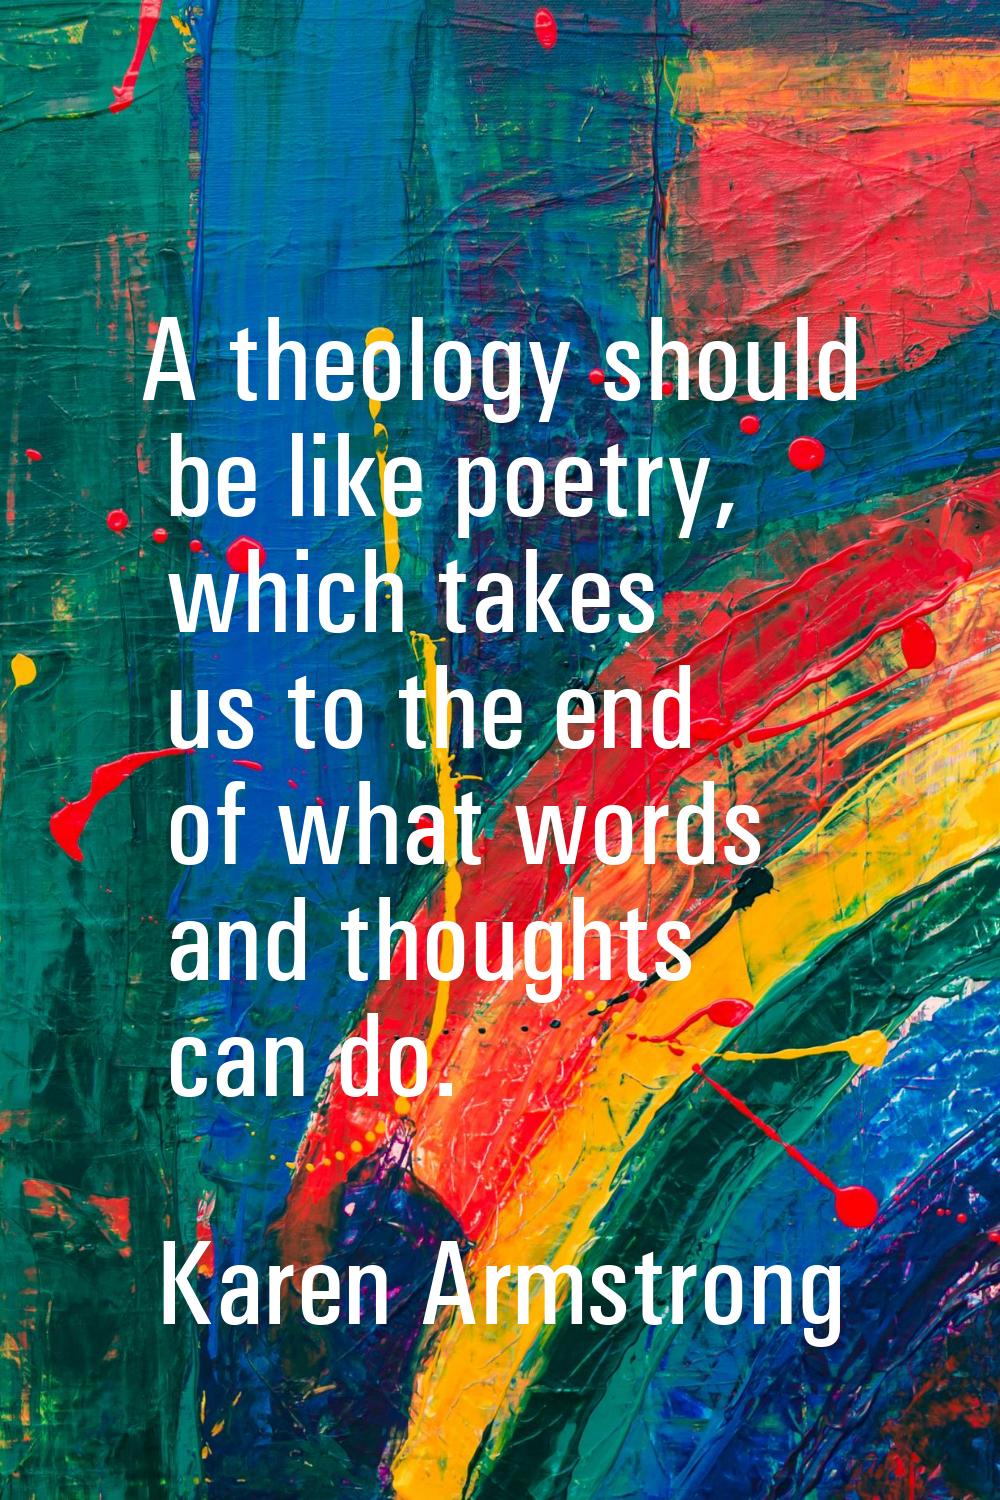 A theology should be like poetry, which takes us to the end of what words and thoughts can do.